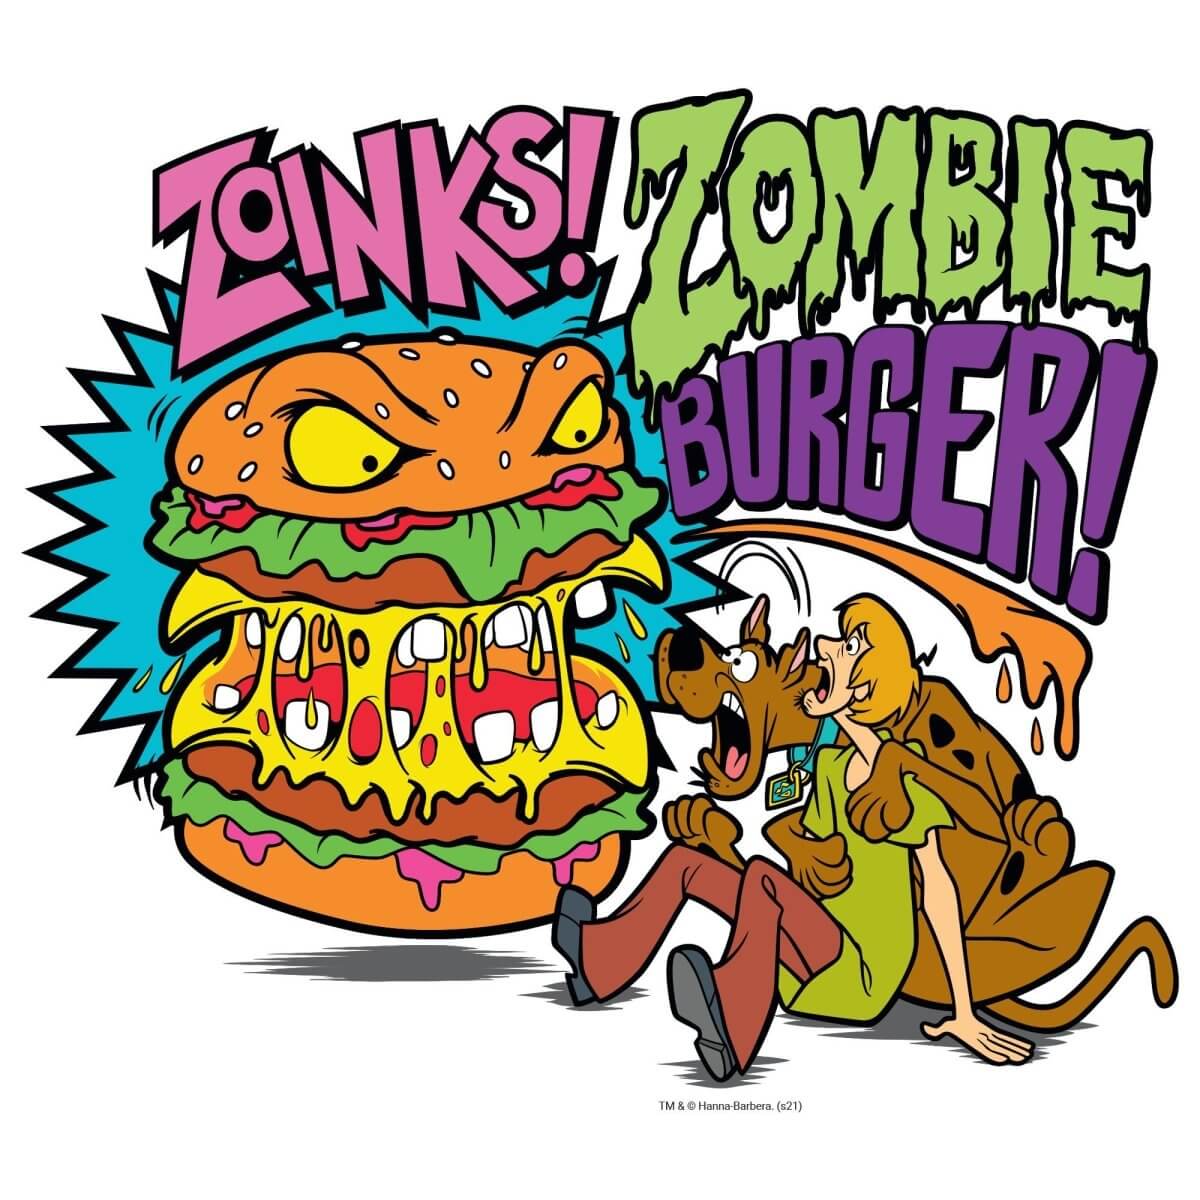 Kismet Decals Home & Room Decor Scooby-Doo and the Zombie Burger Wall decal sticker - officially licensed - latex printed with no solvent odor - Kismet Decals